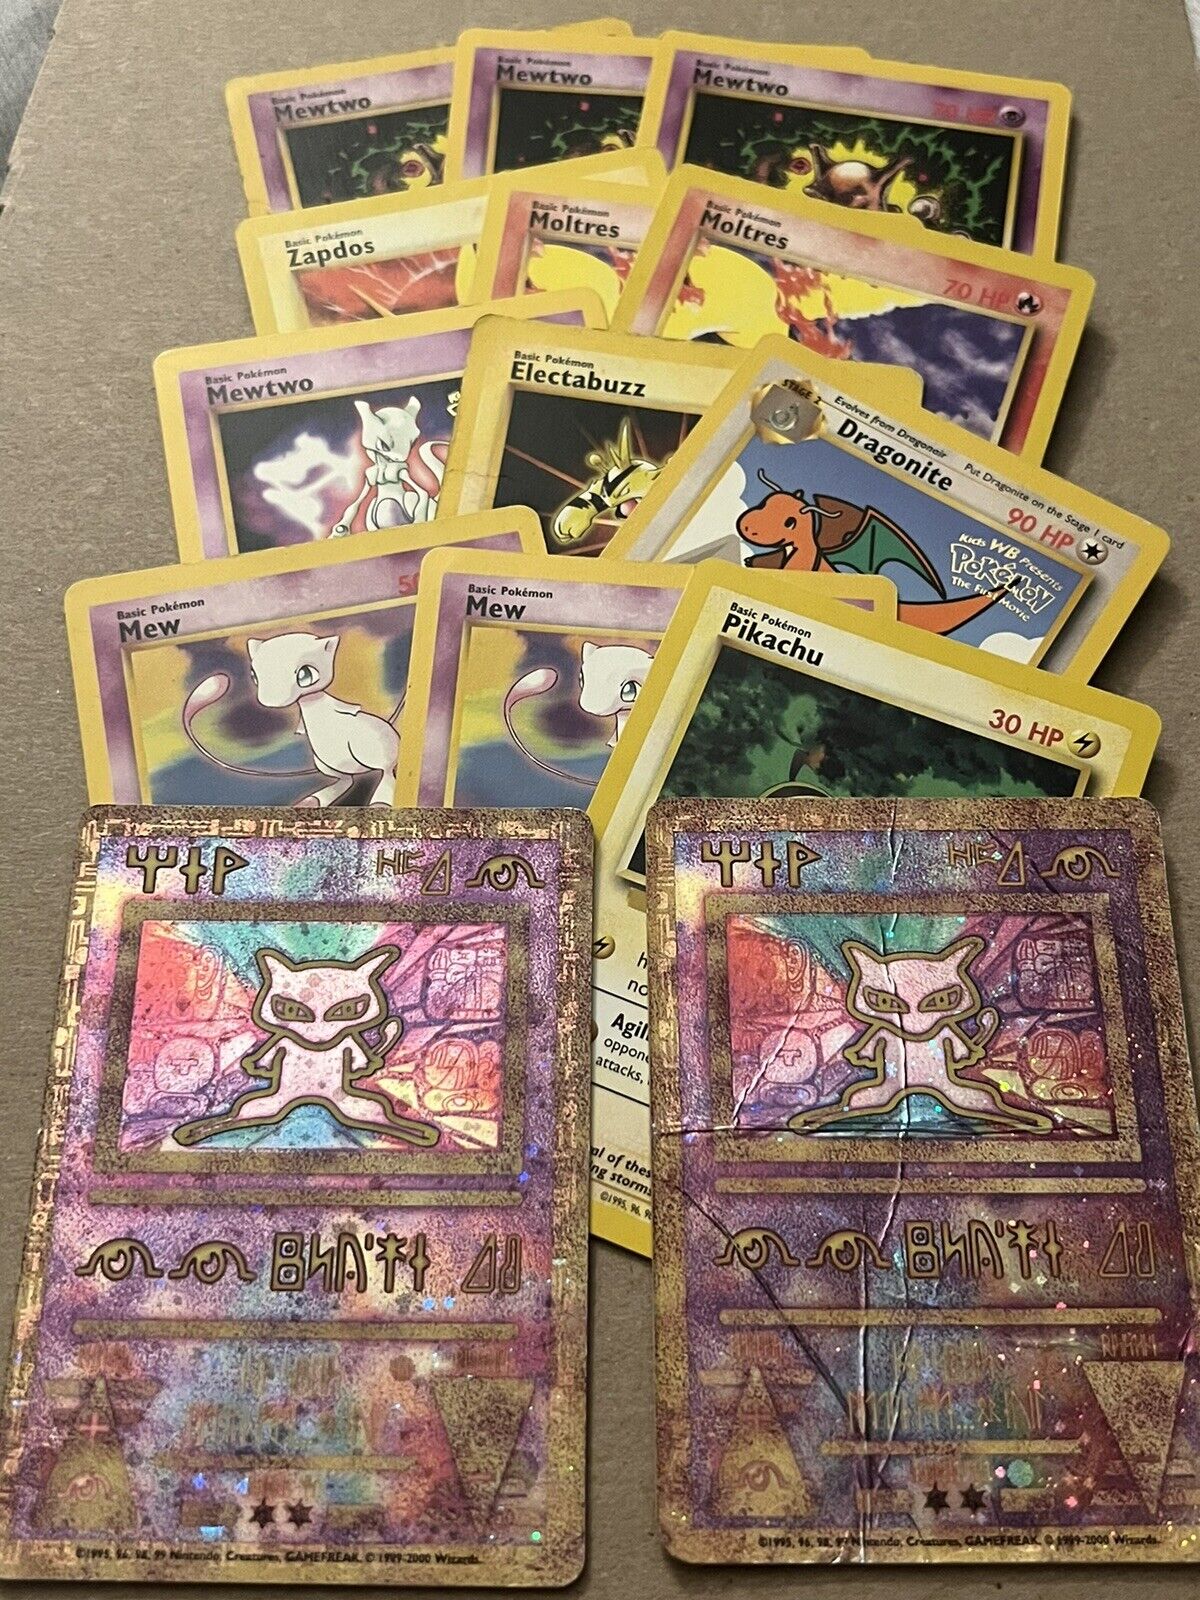 Pokémon WB First Movie Promo Card Lot of 14 Ancient Mew Dragonite Zapdos Moltres